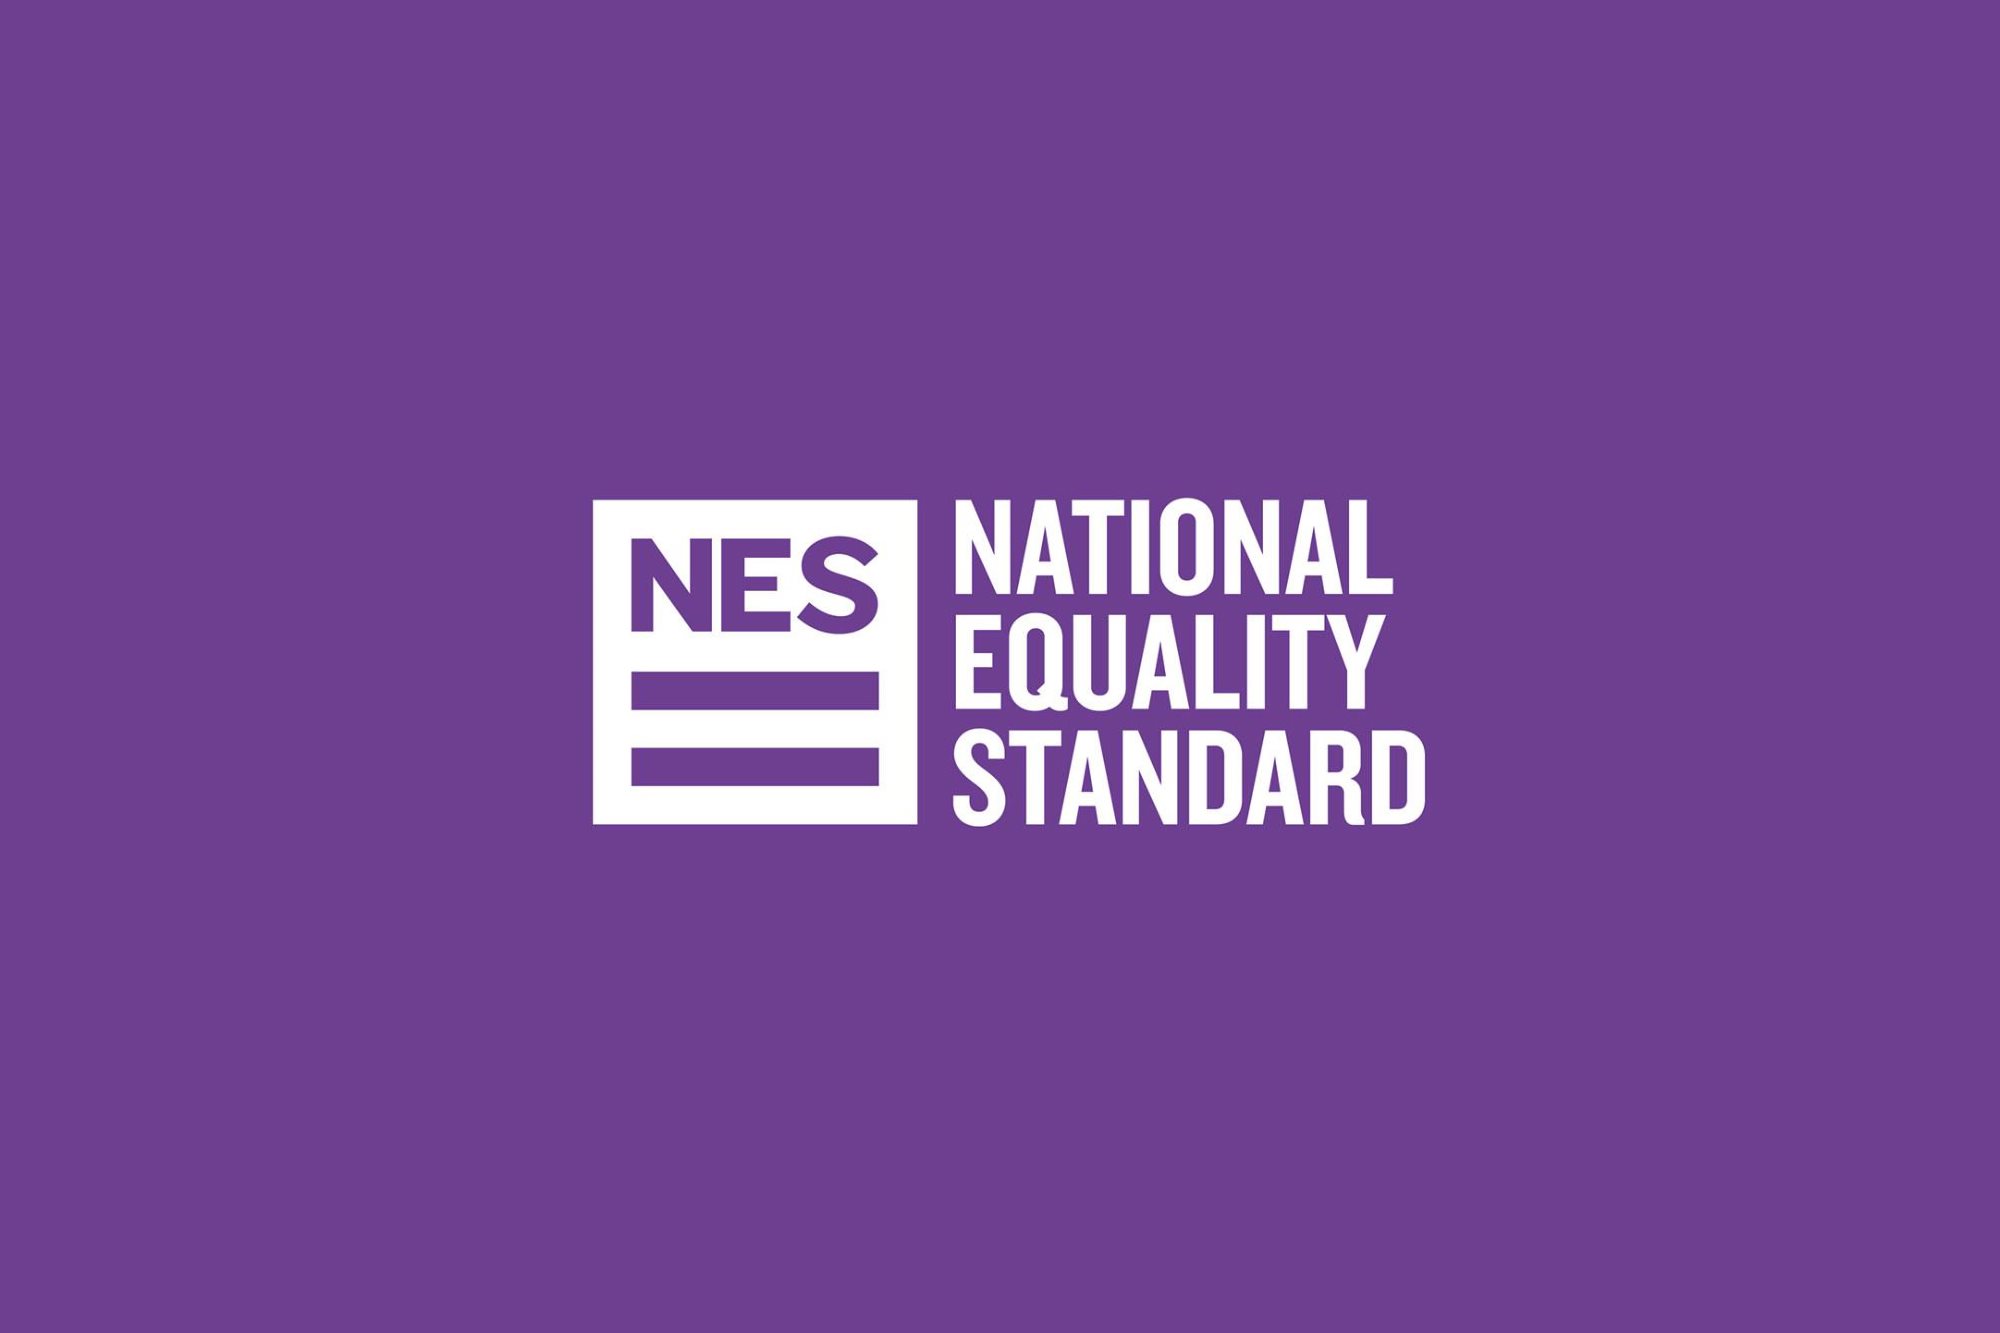 Logo for the National Equality Standard

